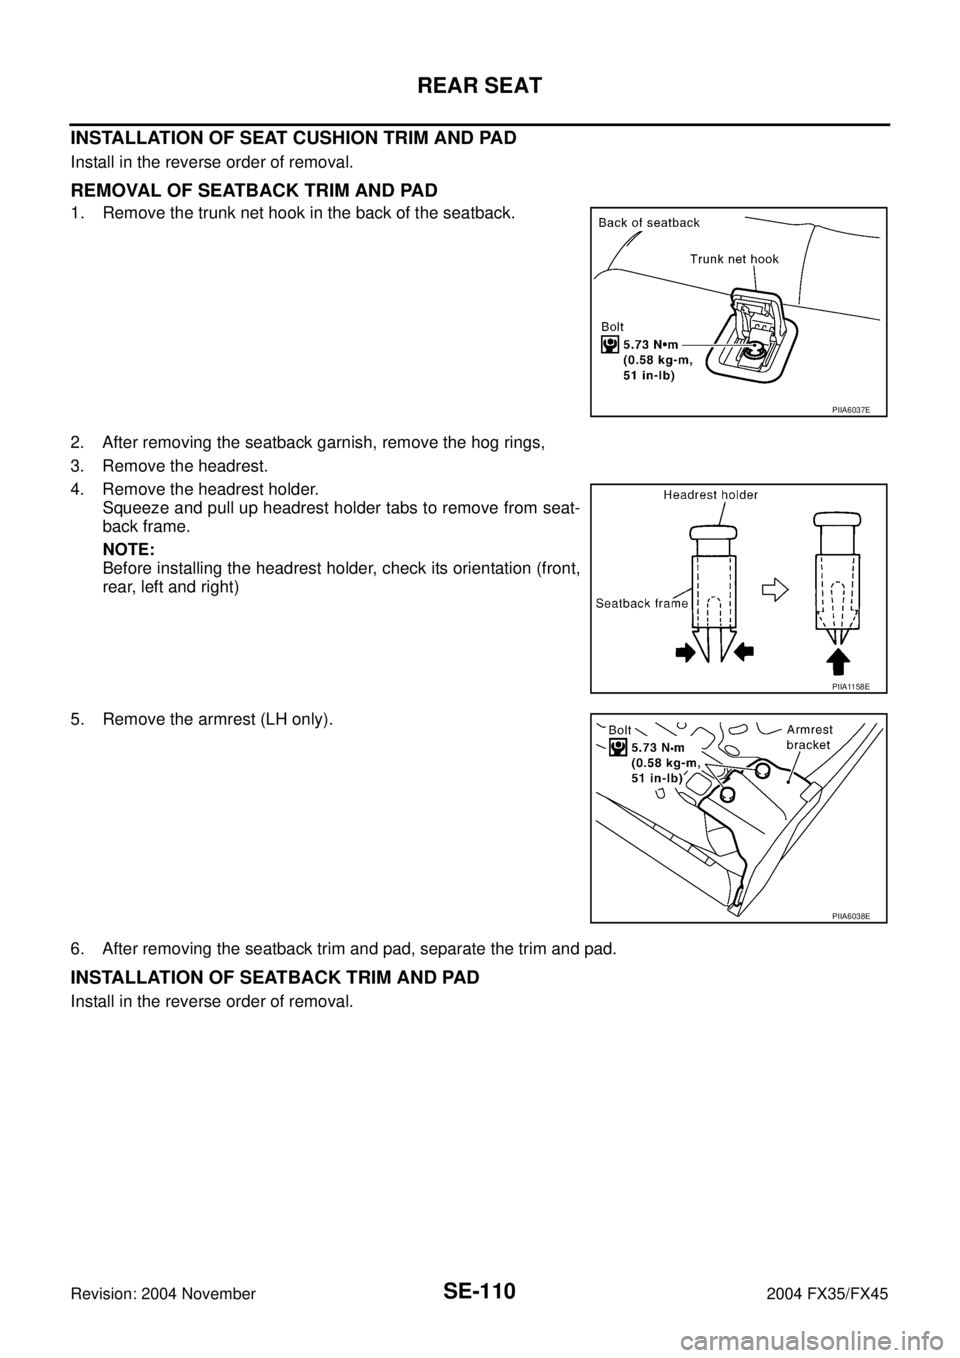 INFINITI FX35 2004  Service Manual SE-110
REAR SEAT
Revision: 2004 November 2004 FX35/FX45
INSTALLATION OF SEAT CUSHION TRIM AND PAD
Install in the reverse order of removal.
REMOVAL OF SEATBACK TRIM AND PAD
1. Remove the trunk net hook